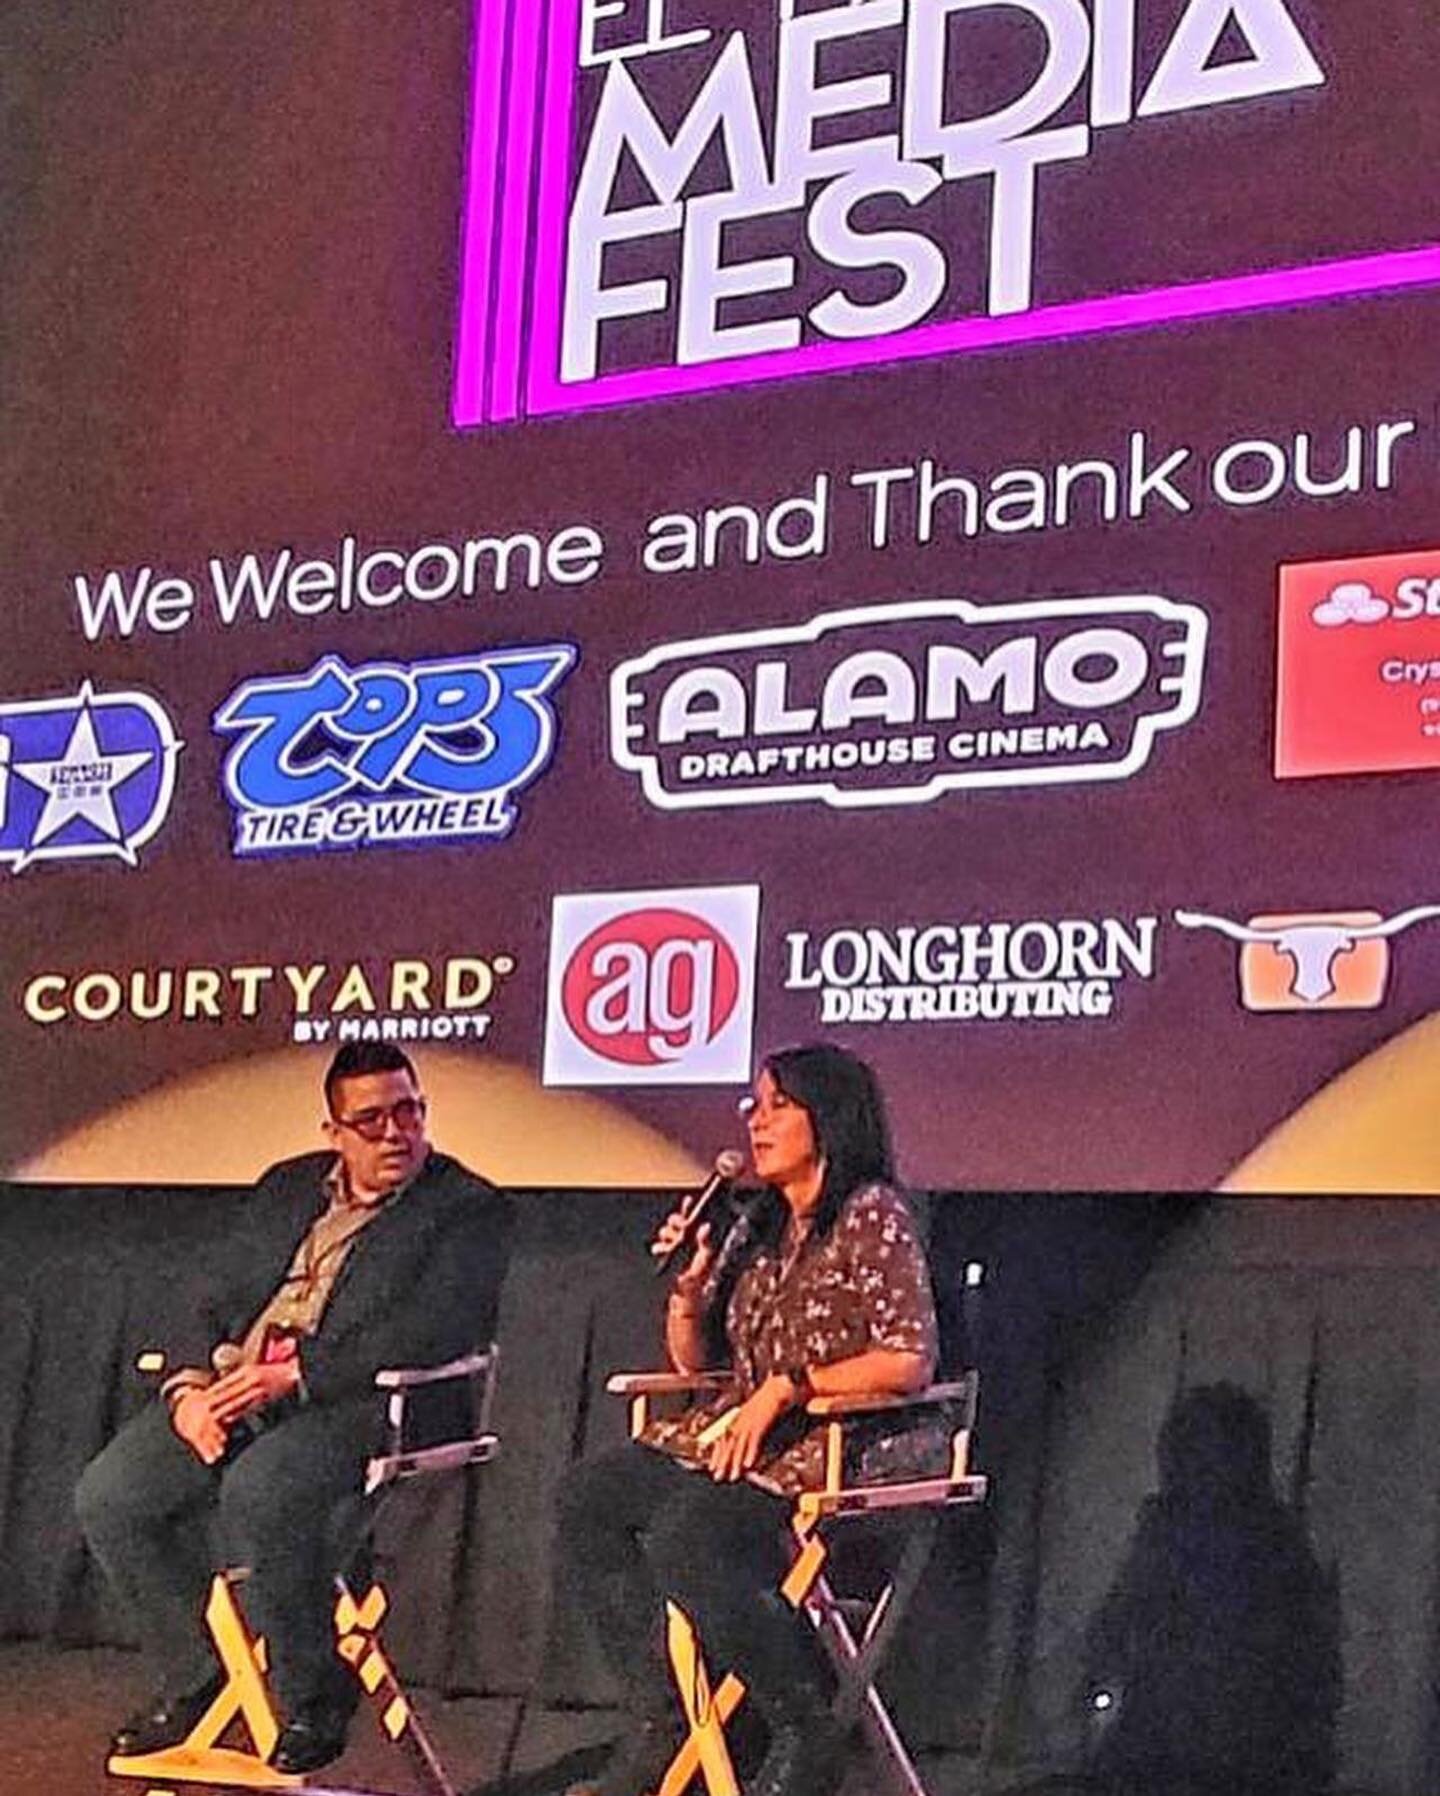 Having a great time @epmf915 . The You are Me &amp; I am You screening was awesome!  So cool to see my film on a big Alamo draft house screen!  The Q&amp;A after had some really good questions and Chris Hanna was a great moderator!  I hope to return 